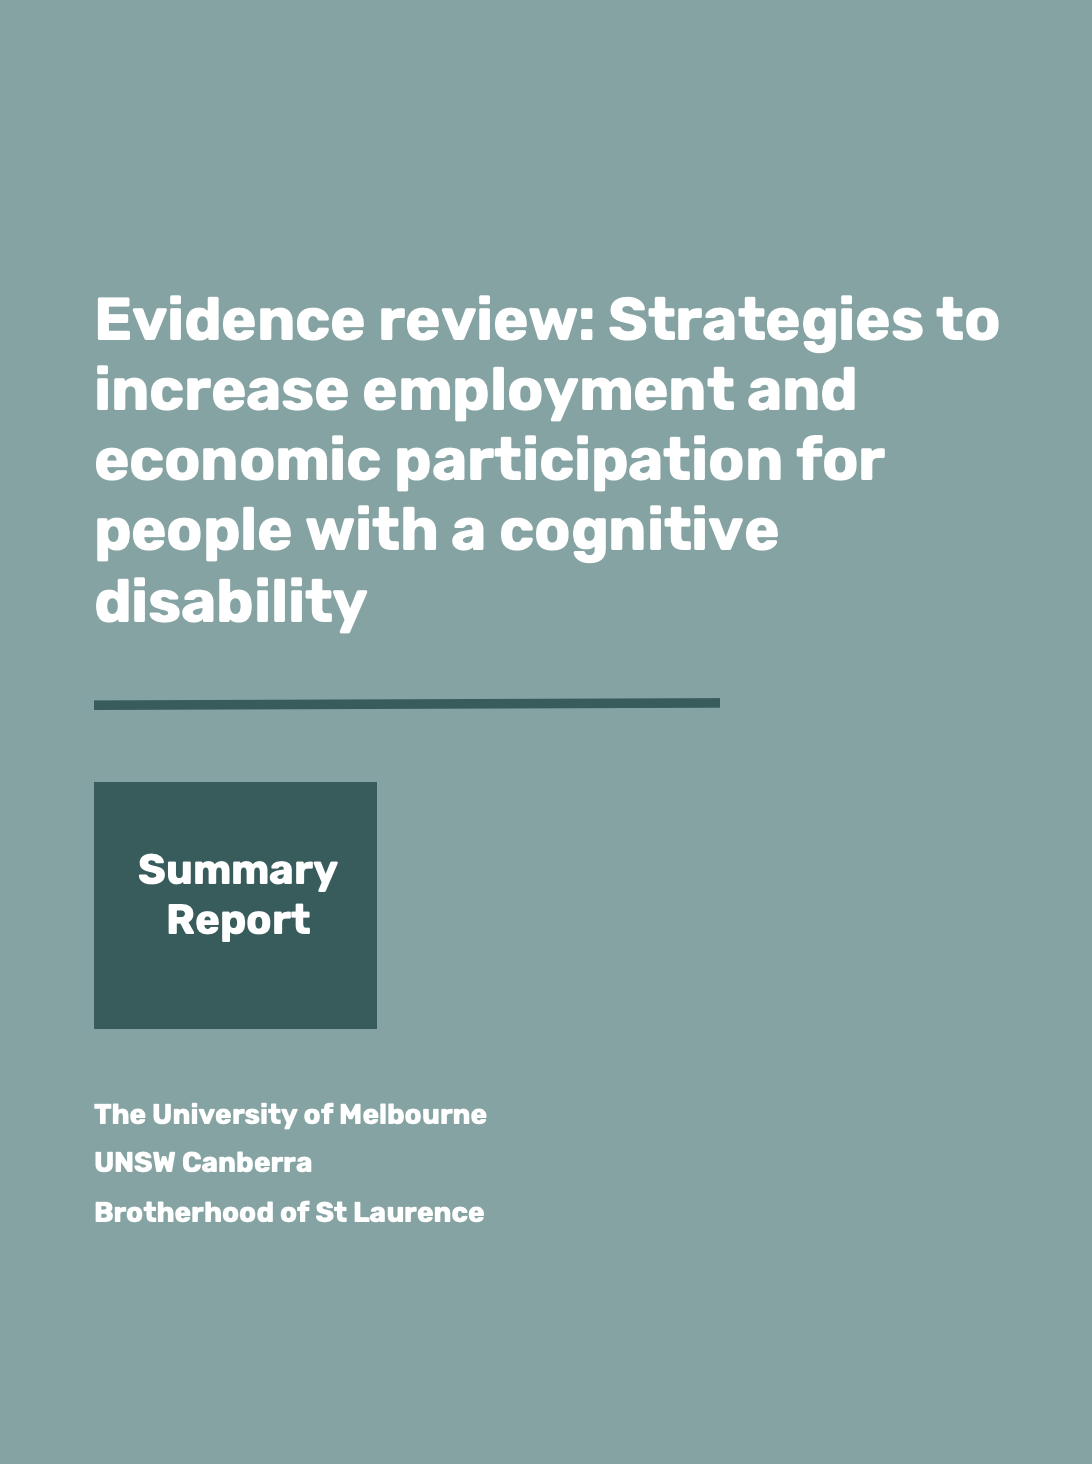 Front cover of Evidence Review: Strategies that increase employment and economic participation for people with cognitive disability